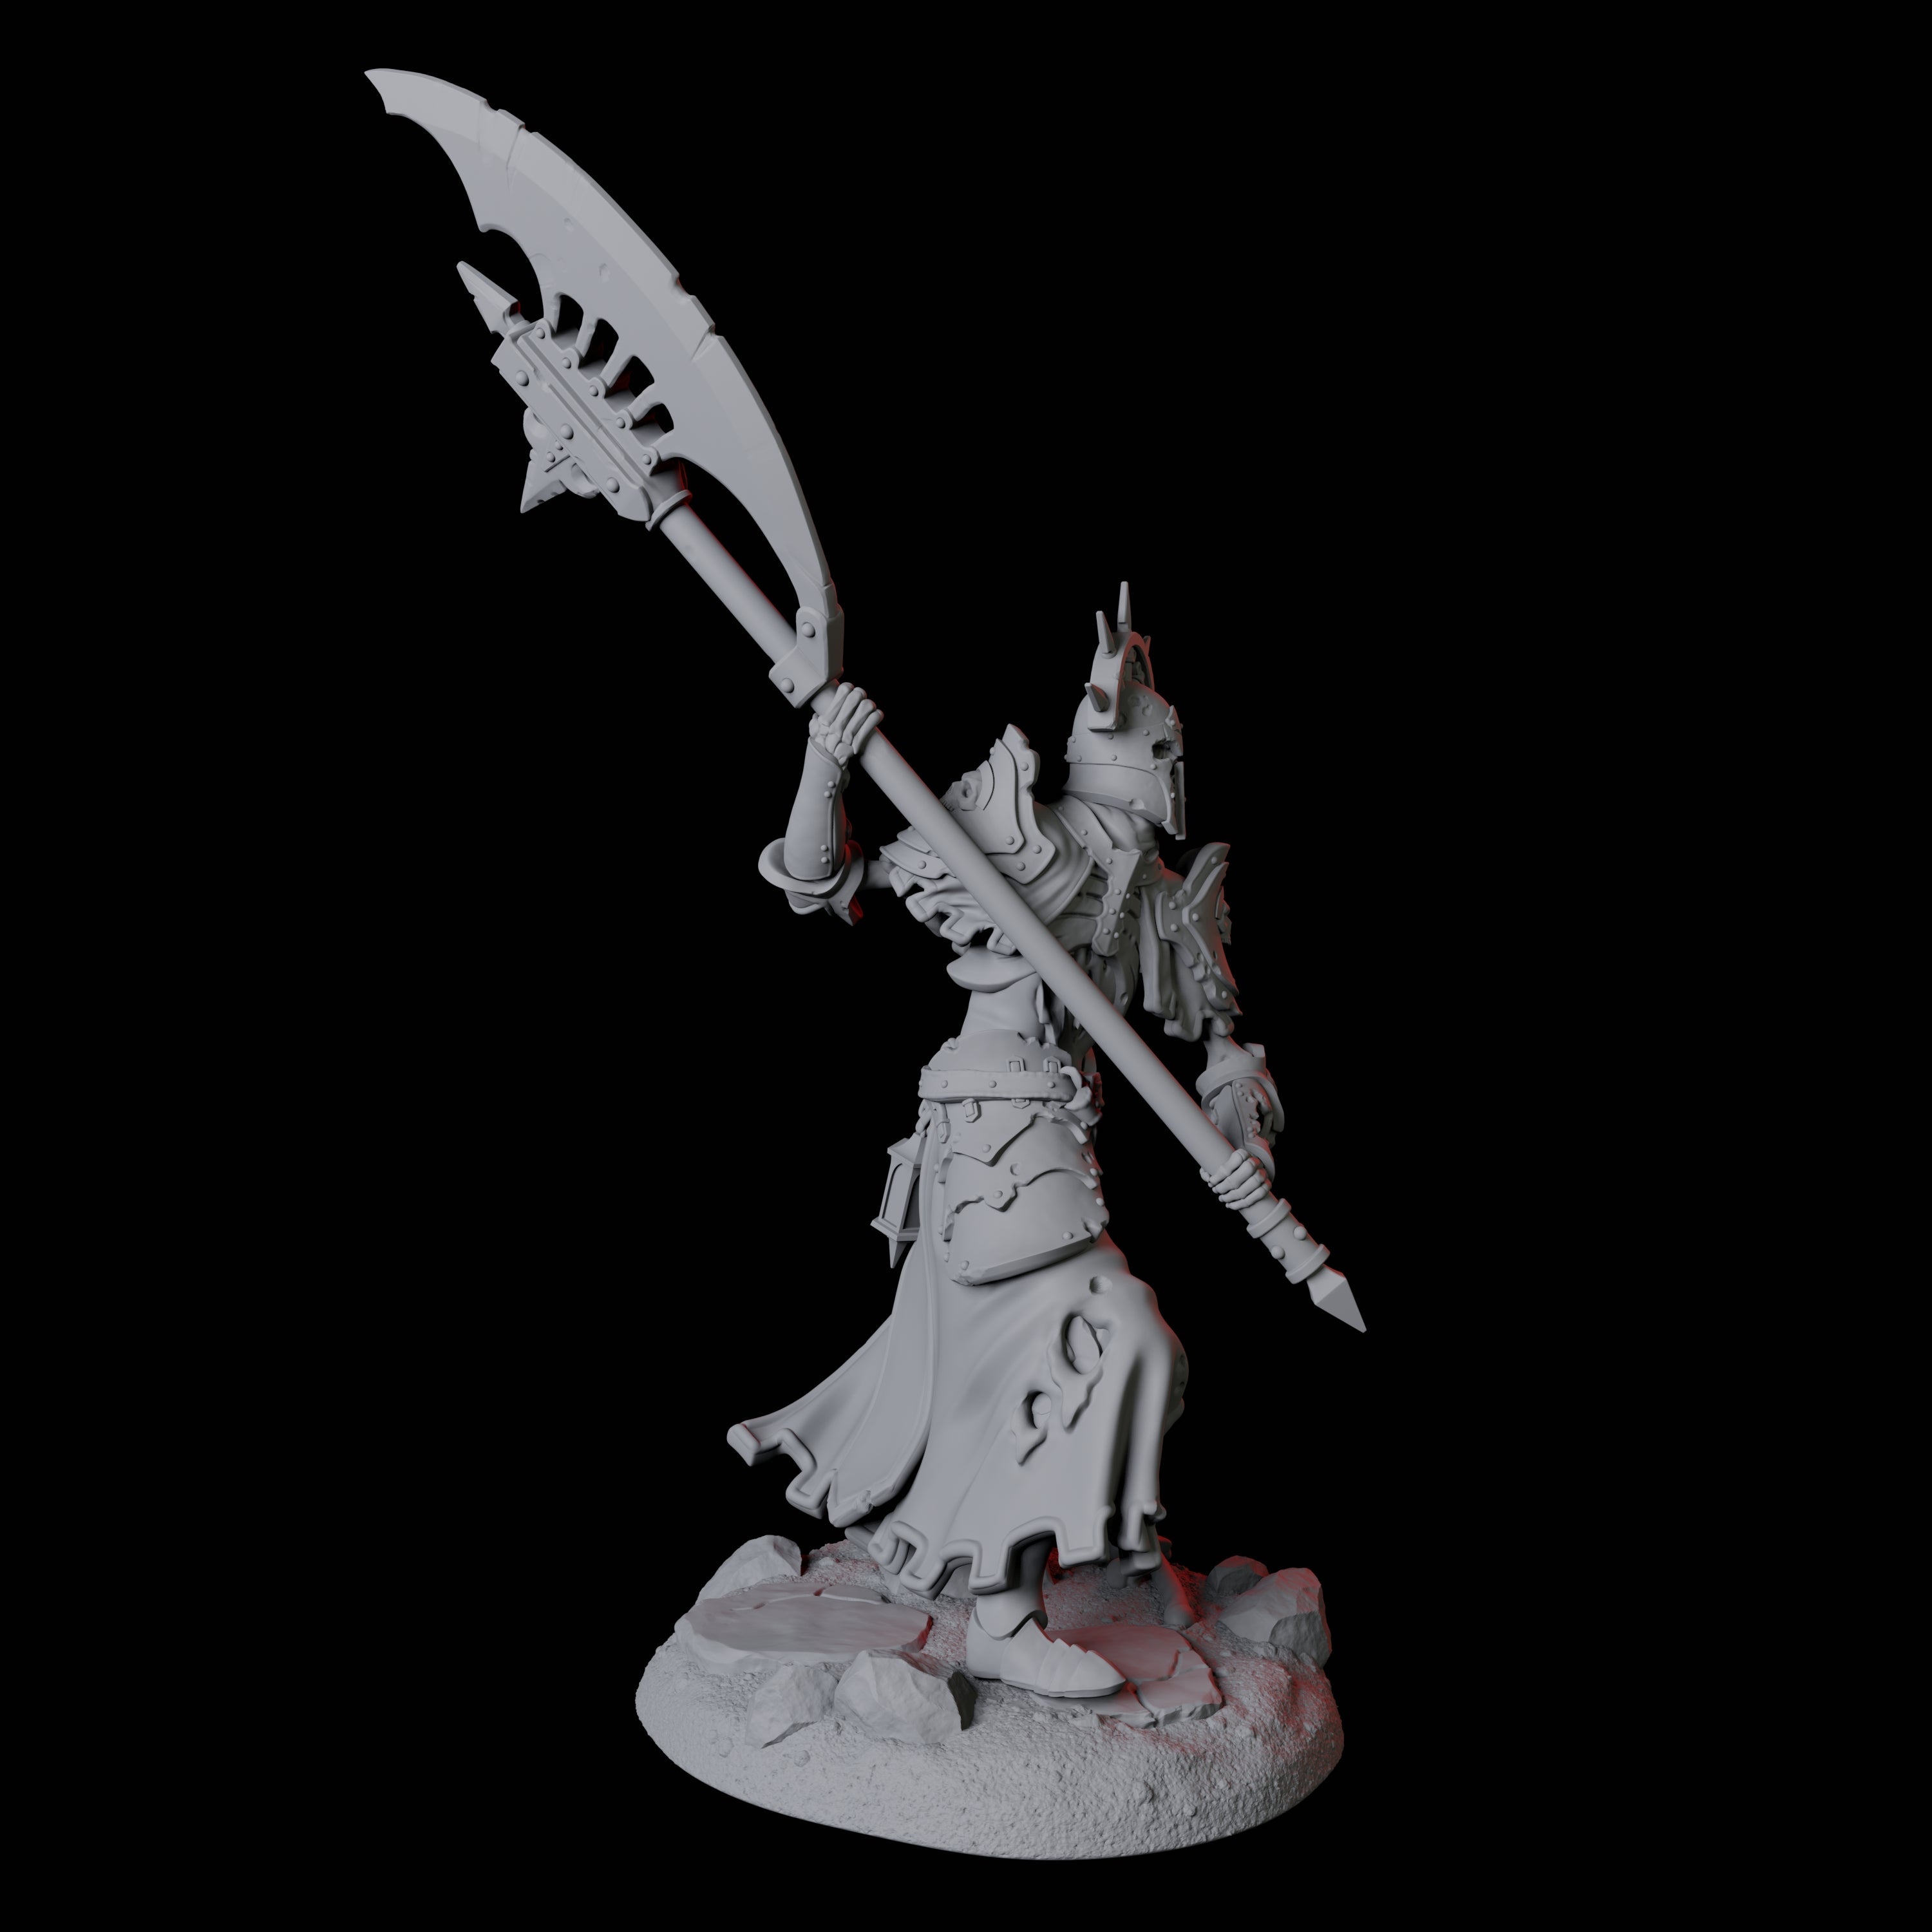 Roaming Undead Warrior A Miniature for Dungeons and Dragons, Pathfinder or other TTRPGs